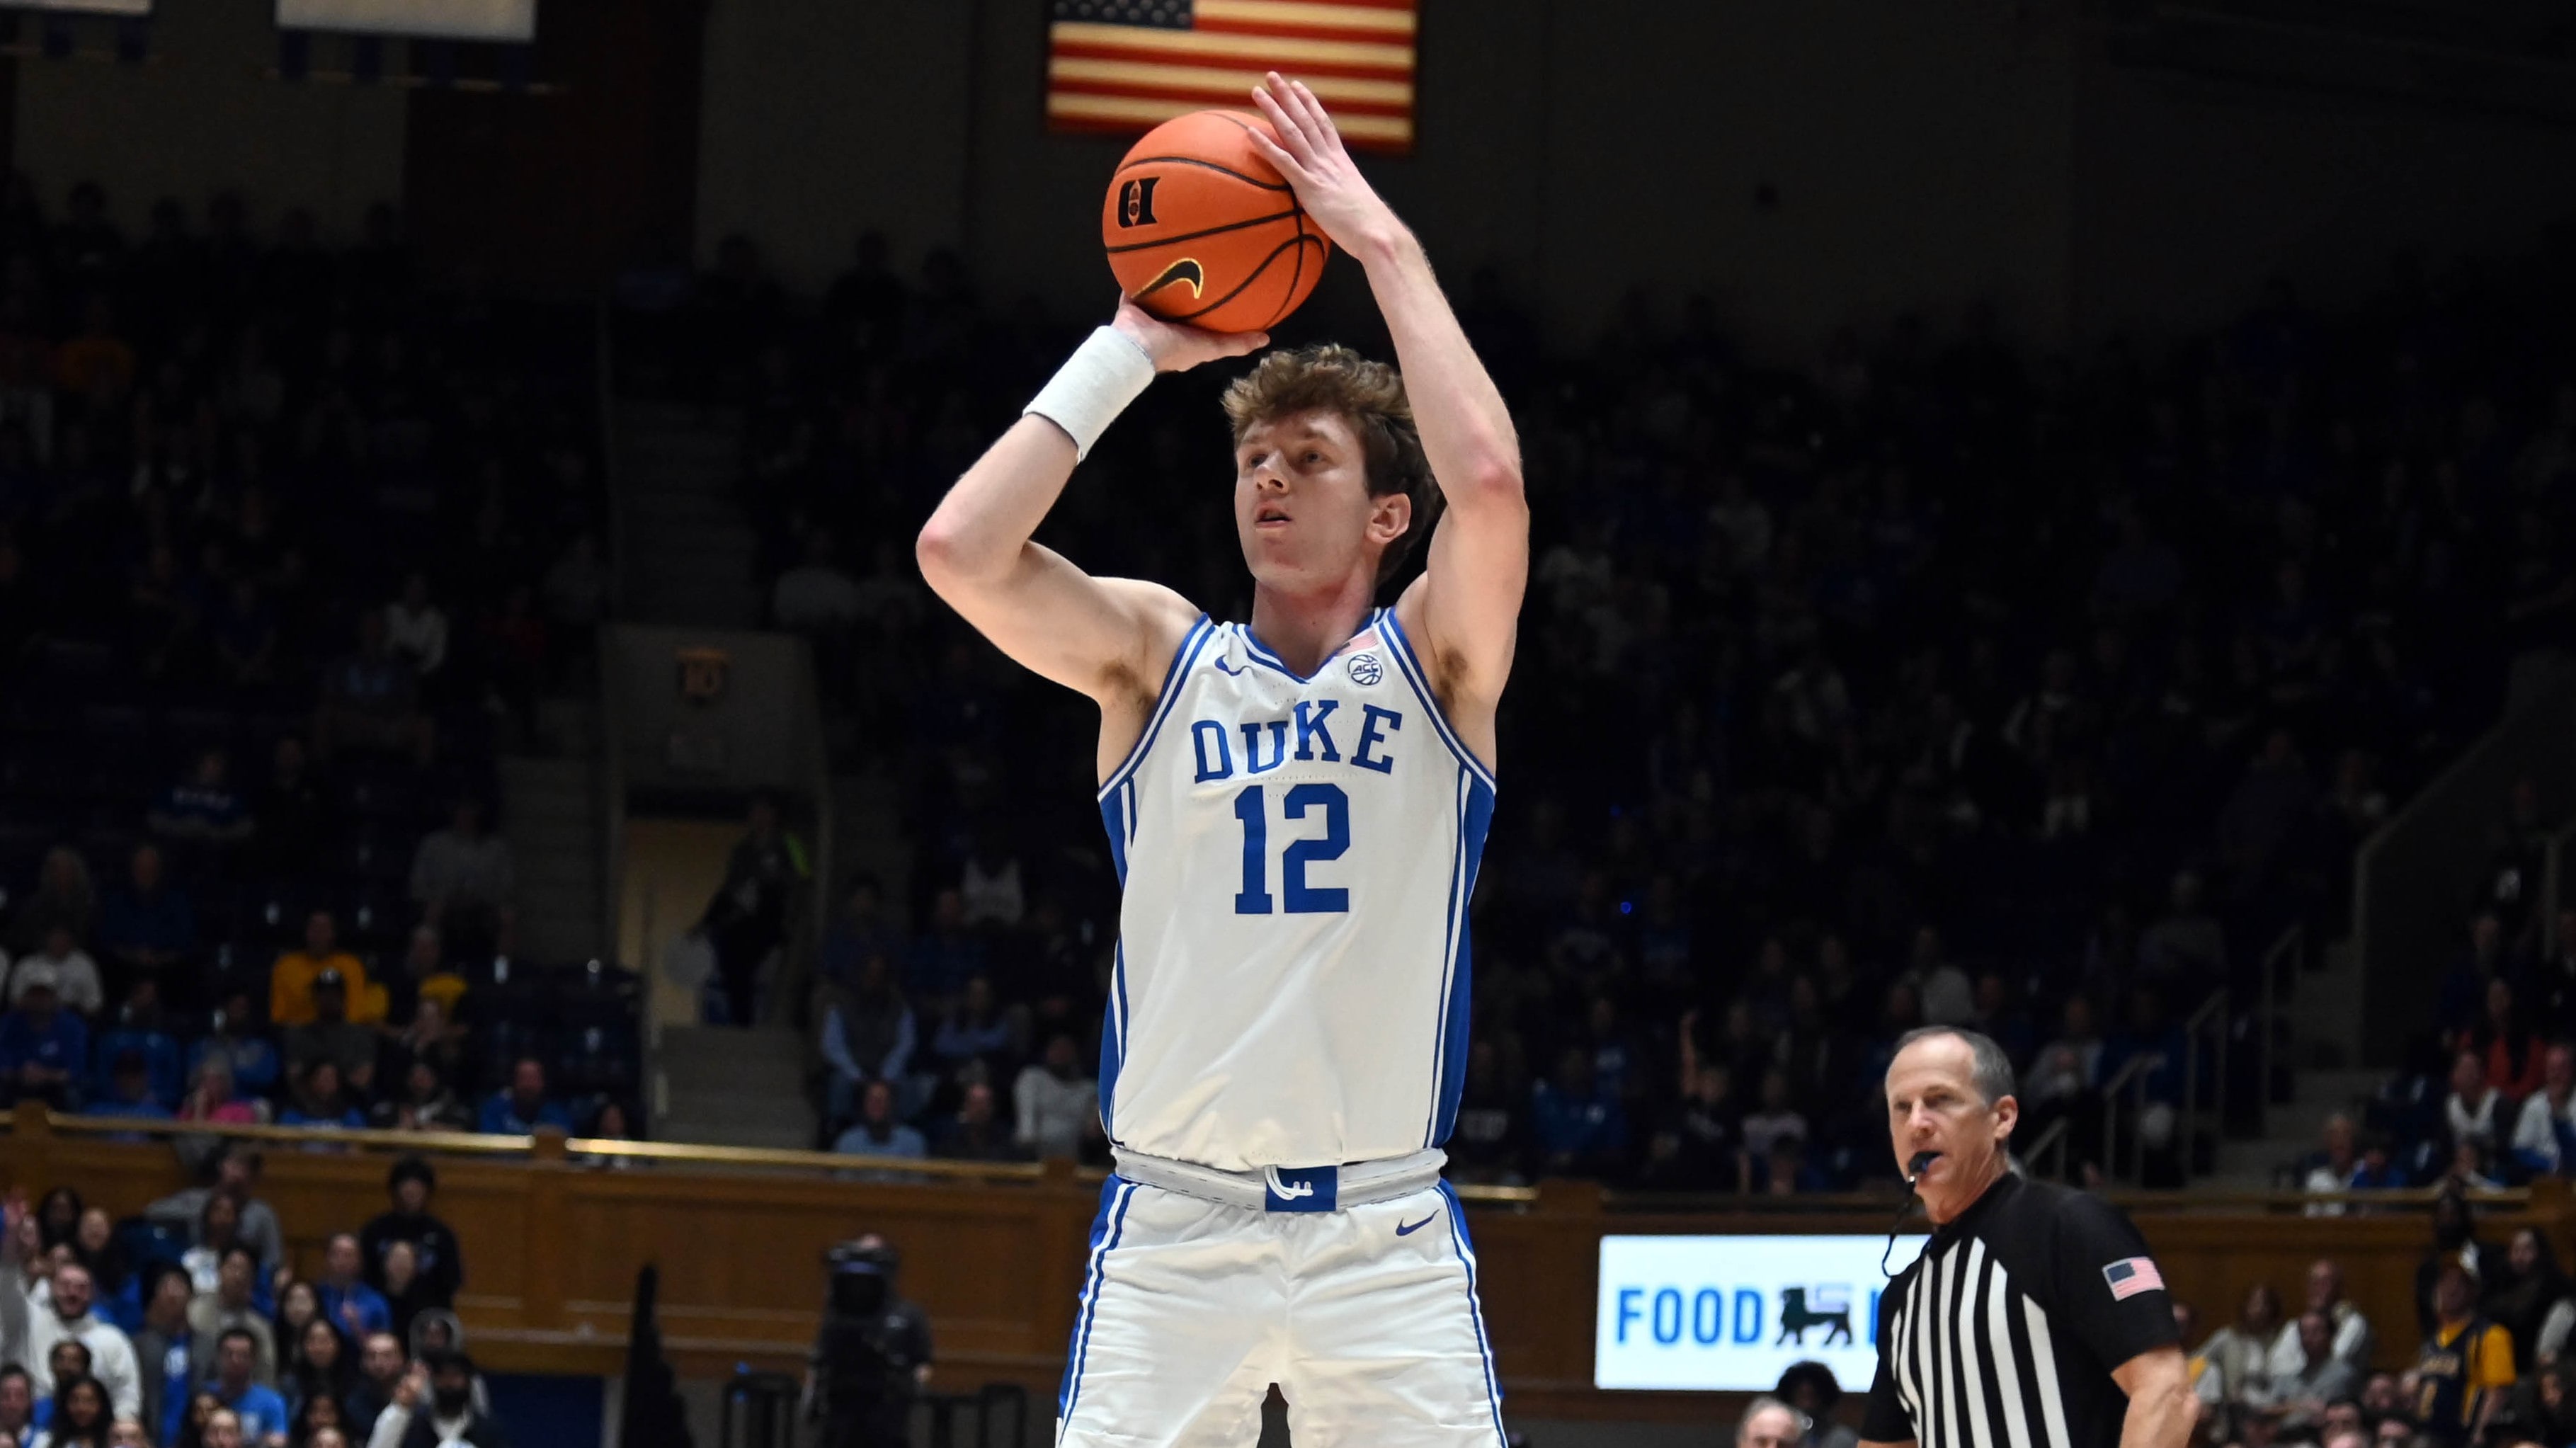 TJ Power shoots a three-pointer during the Duke men's basketball game against La Salle at Cameron Indoor Stadium.